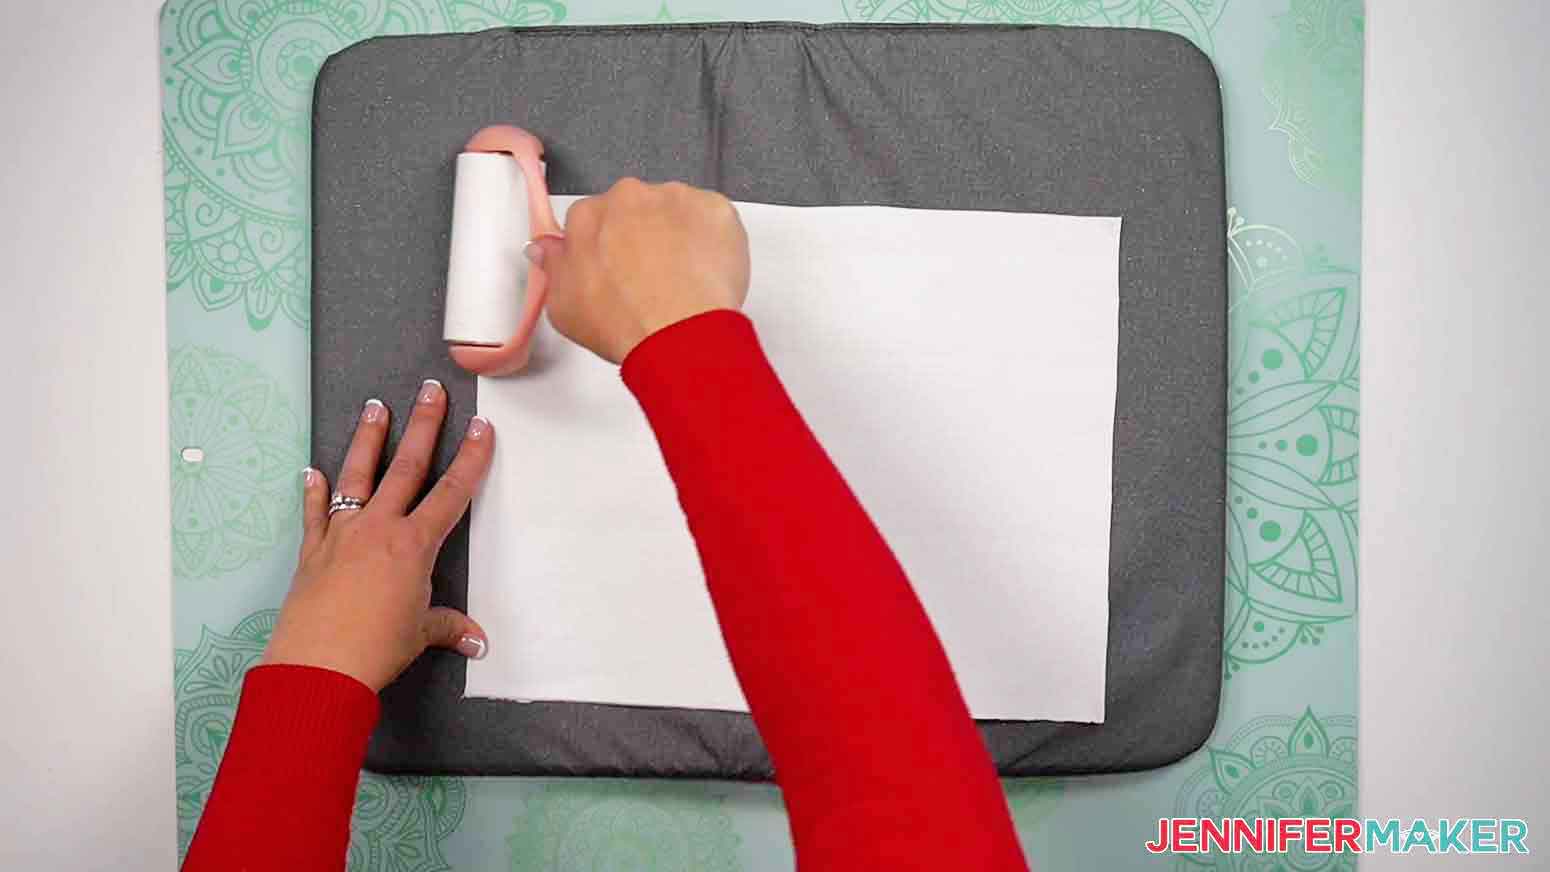 Use a lint roller to clean the canvas of any debris before applying design.